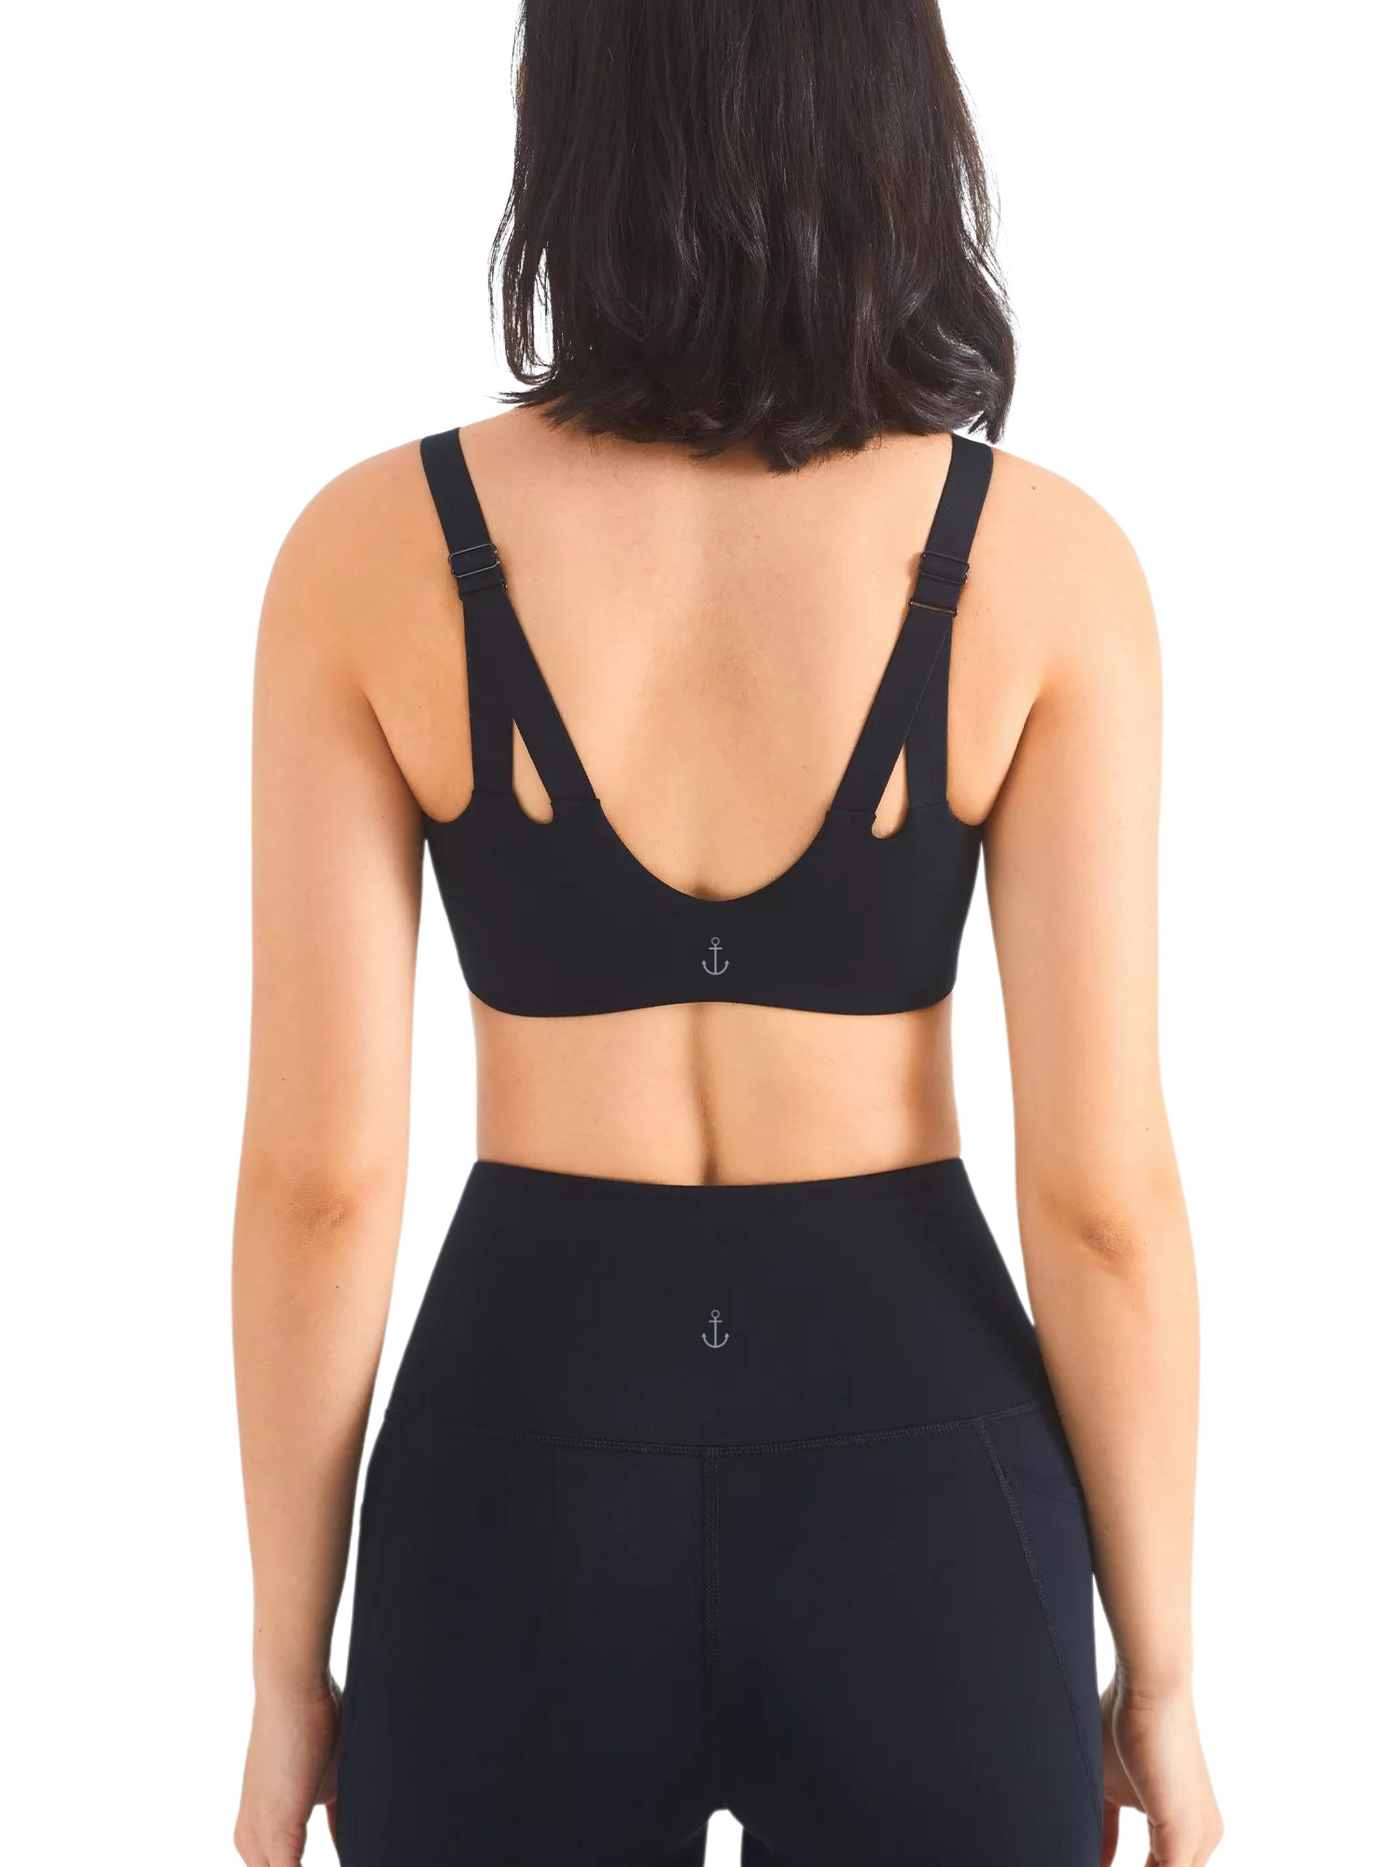 Navalora Fit Everyday Comfortable and Supportive Sports Bra with Adjustable Straps in Black  Back View